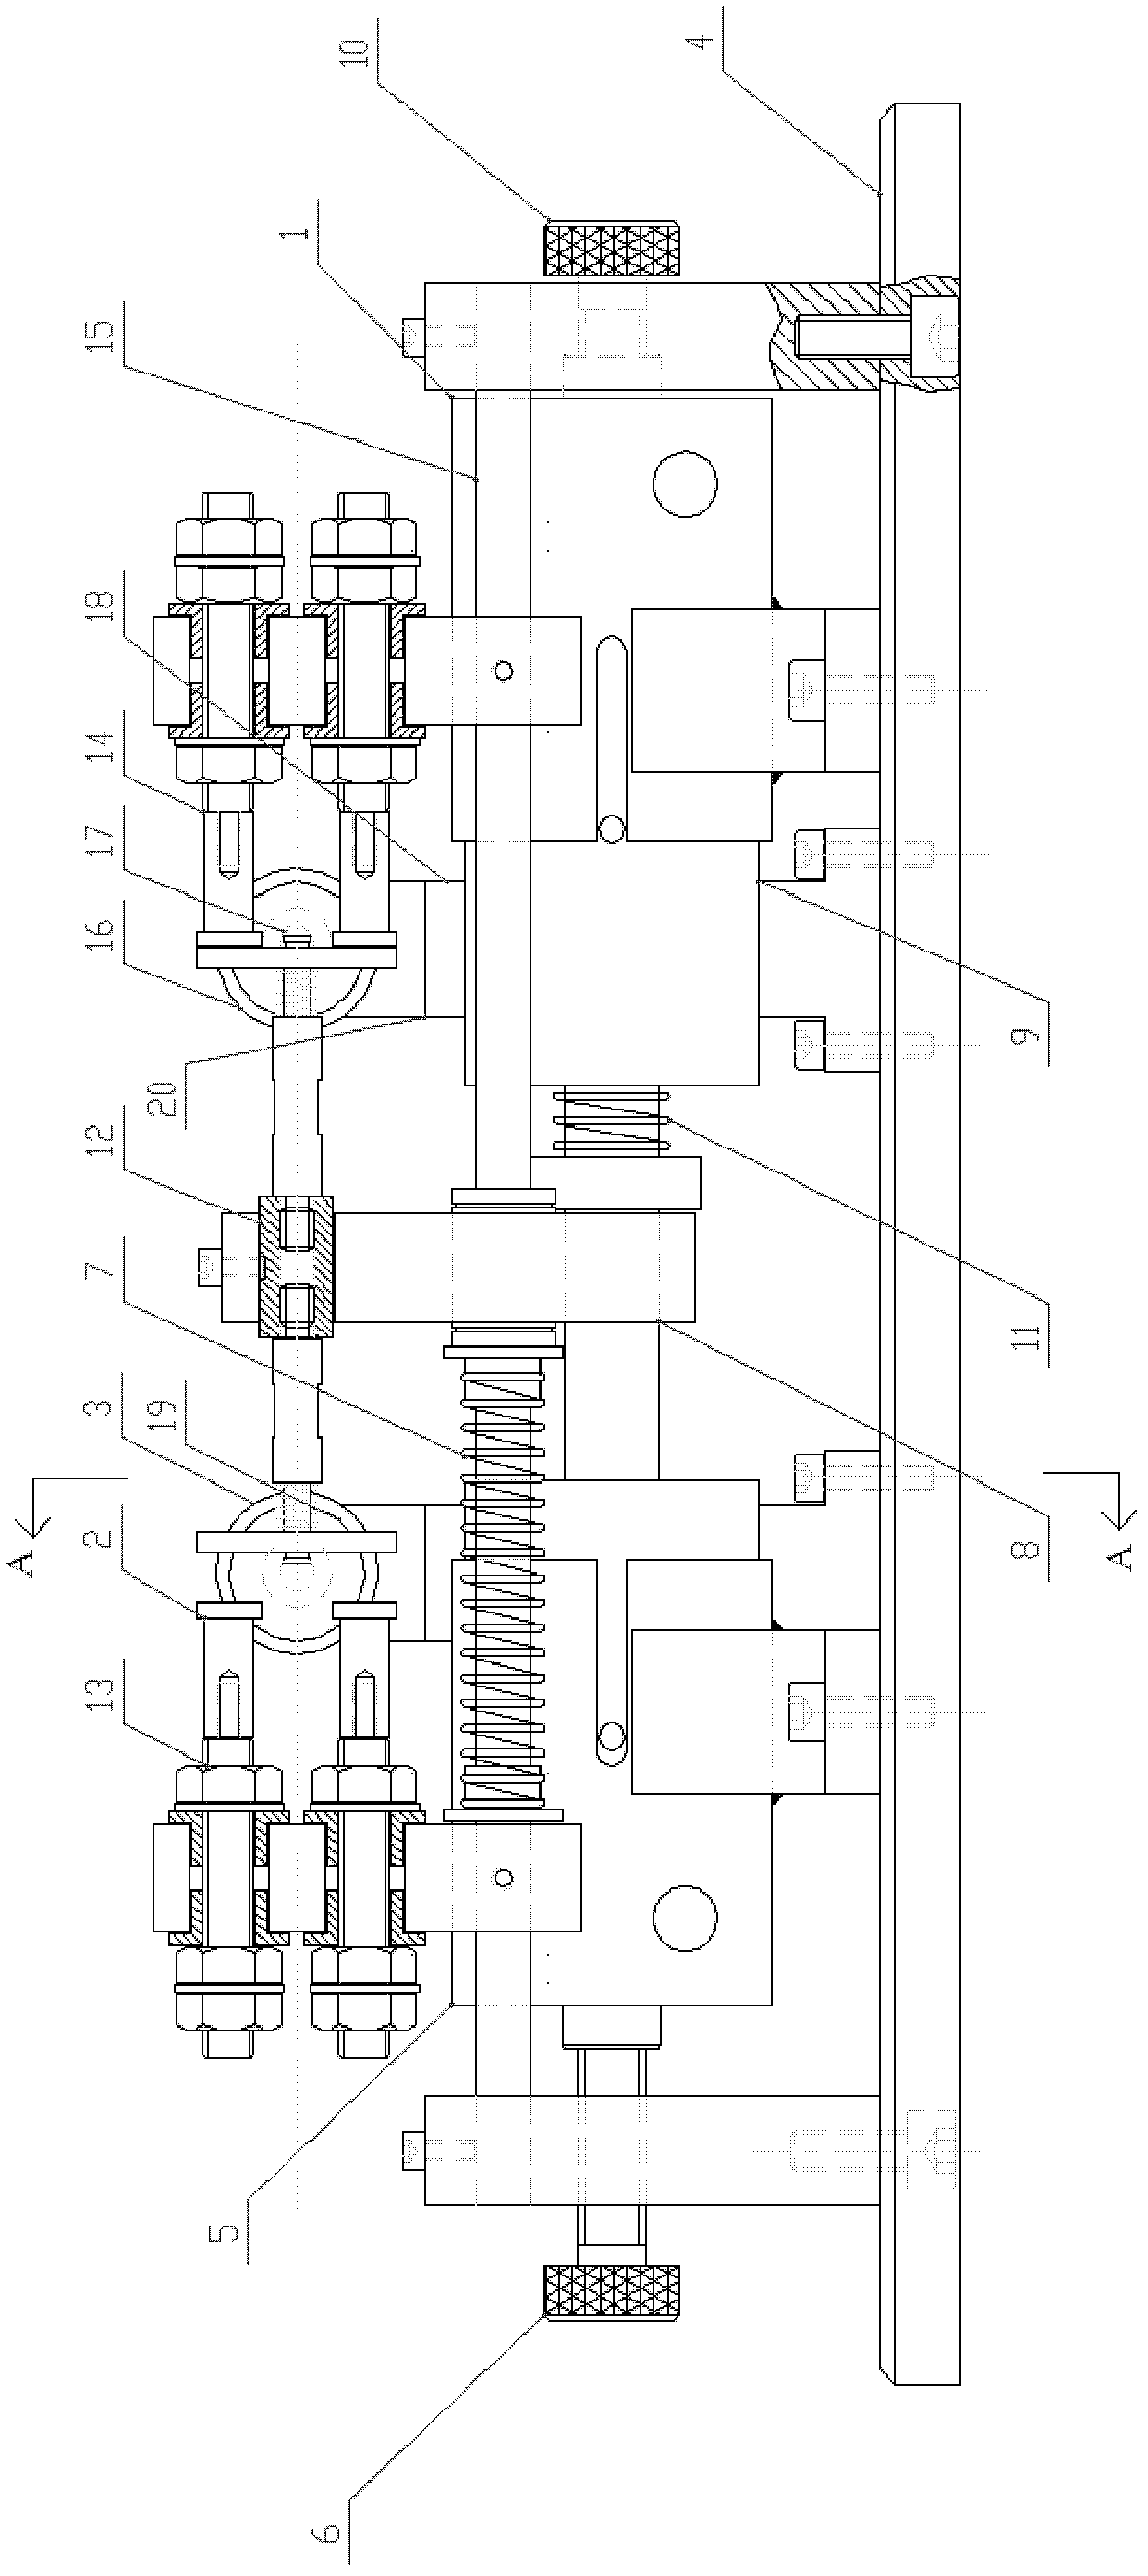 Multi-parameter adjustable operating mechanism based on dual-coil structure